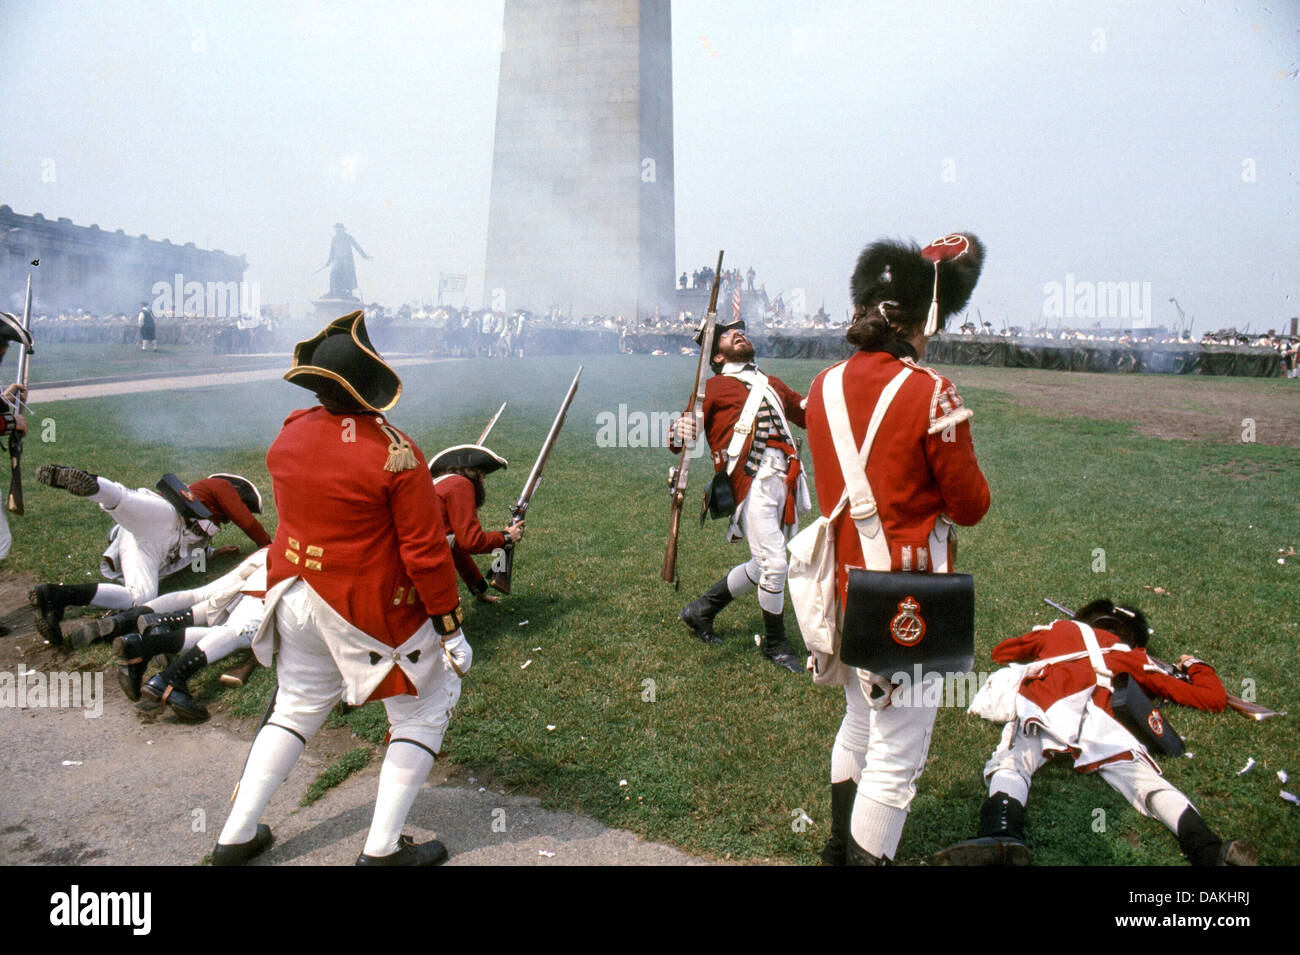 Redcoats take casualties attacking colonialists in a reenactment of the 1775 Battle of Bunker Hill, Charlestown, Massachusetts Stock Photo